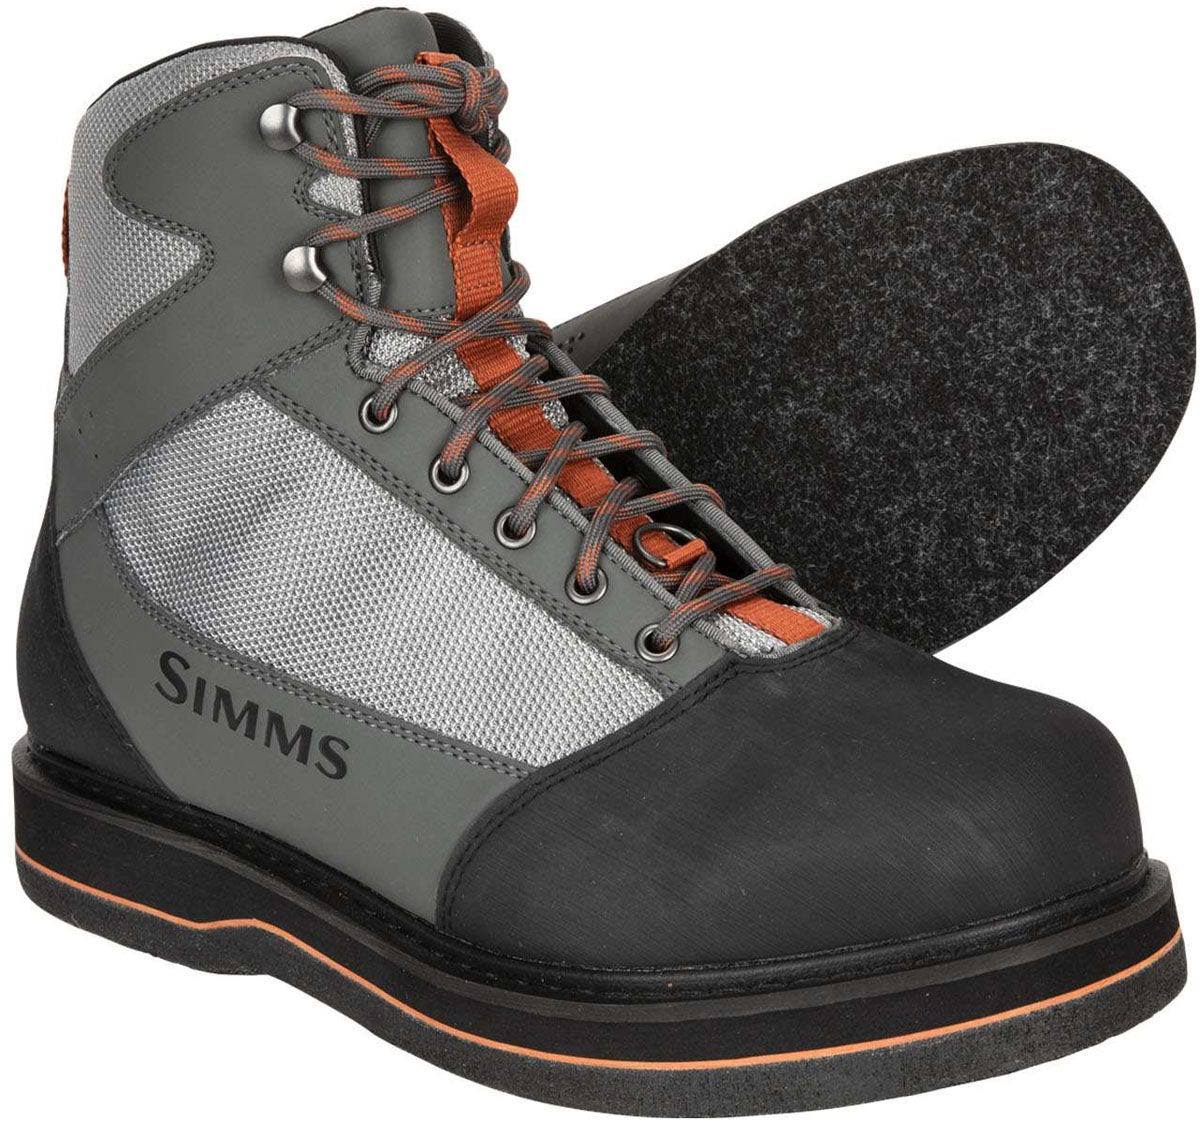 Simms Tributary Wading Boot - Felt, 11